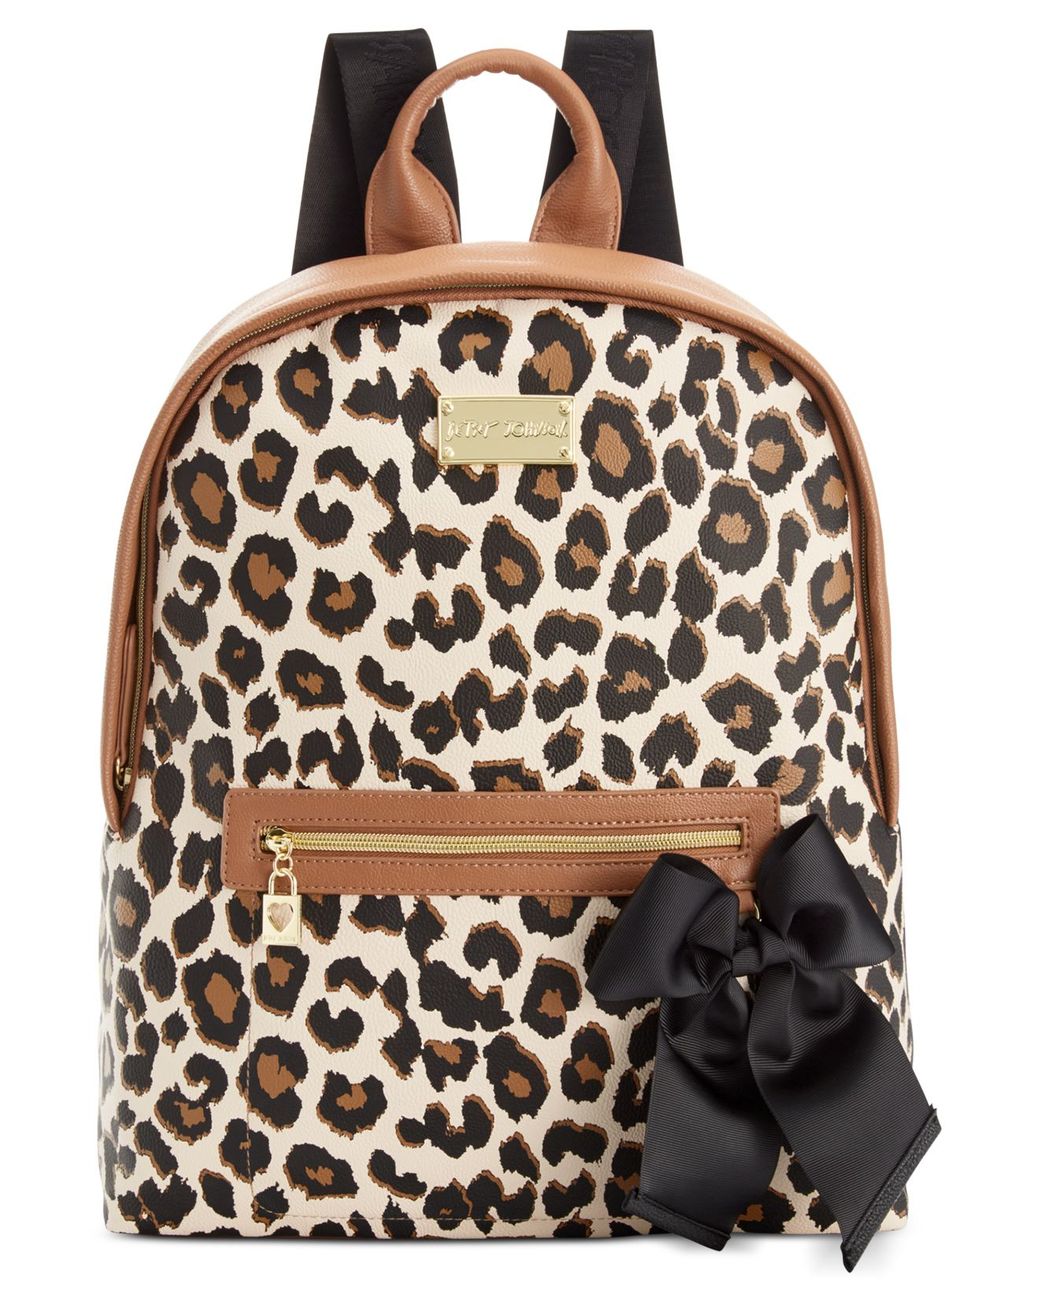 XMCL Animal Leopard Print Durable Backpack College School Book Shoulder Bag  Travel Daypack for Boys Girls Man Woman : Amazon.in: Bags, Wallets and  Luggage